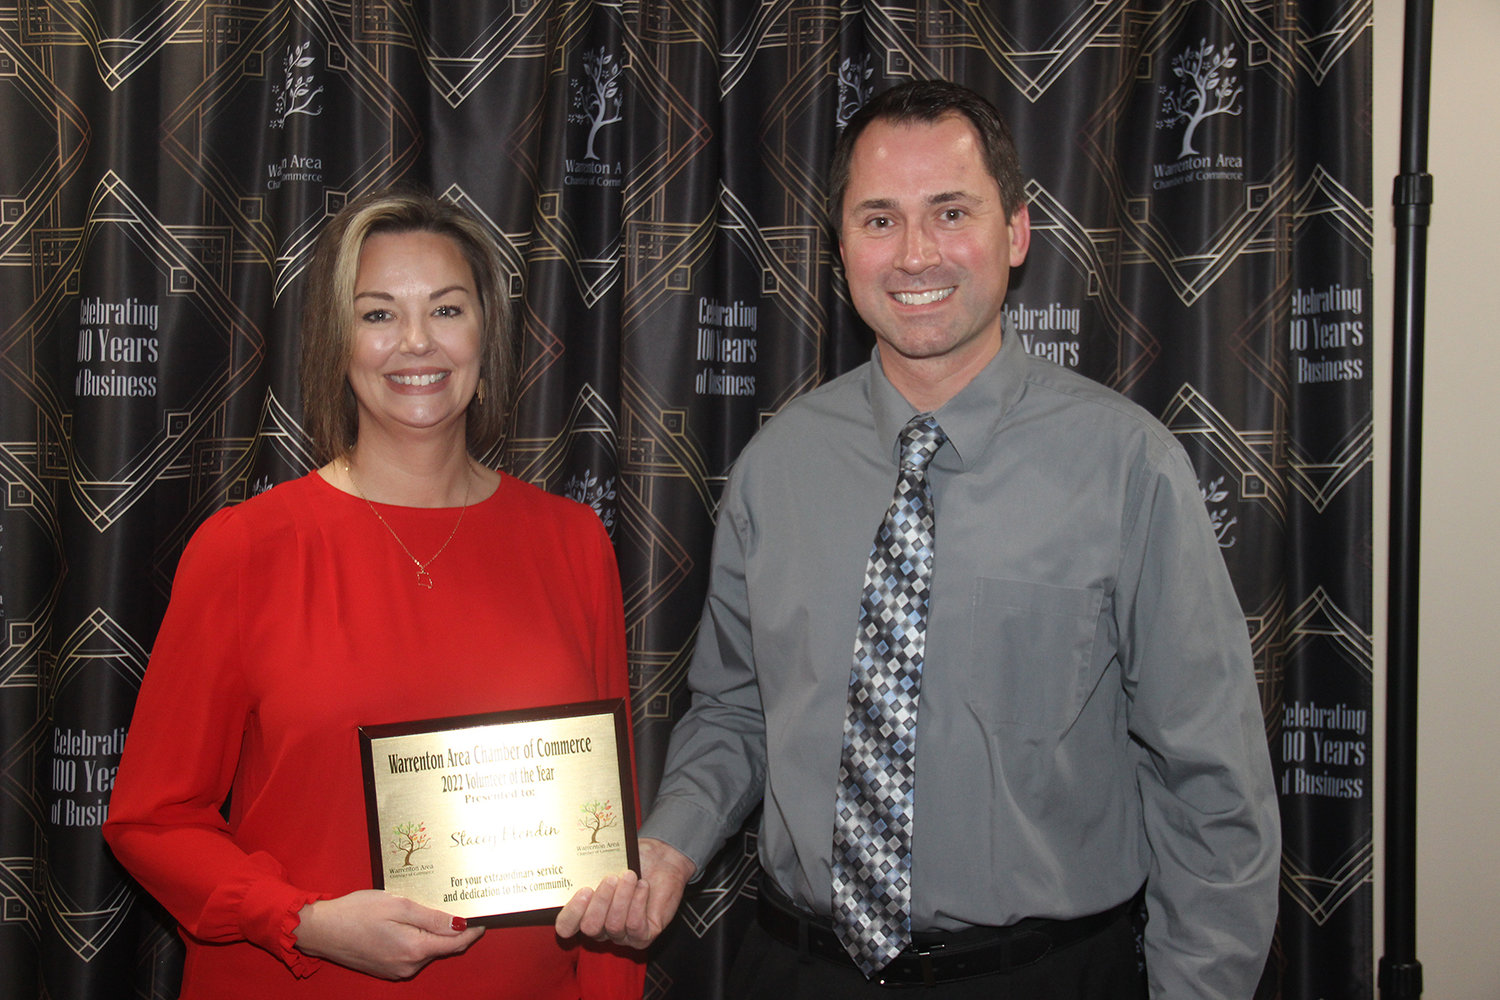 VOLUNTEER OF THE YEAR — Stacey Blondin accepts her award from board member Dan Dieckmann.